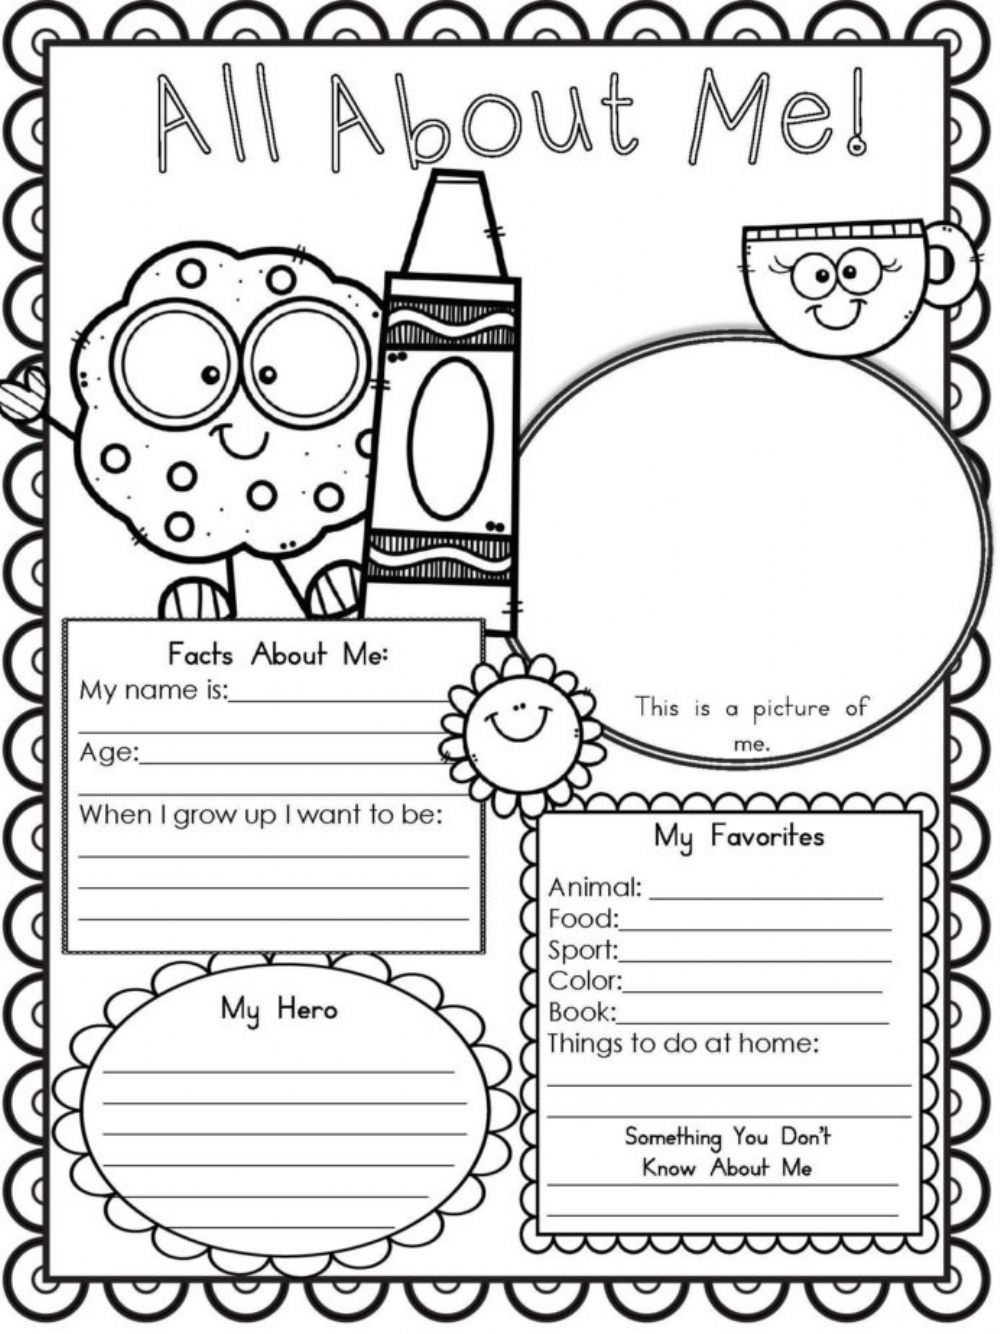 All About Me Online Exercise For Third Grade